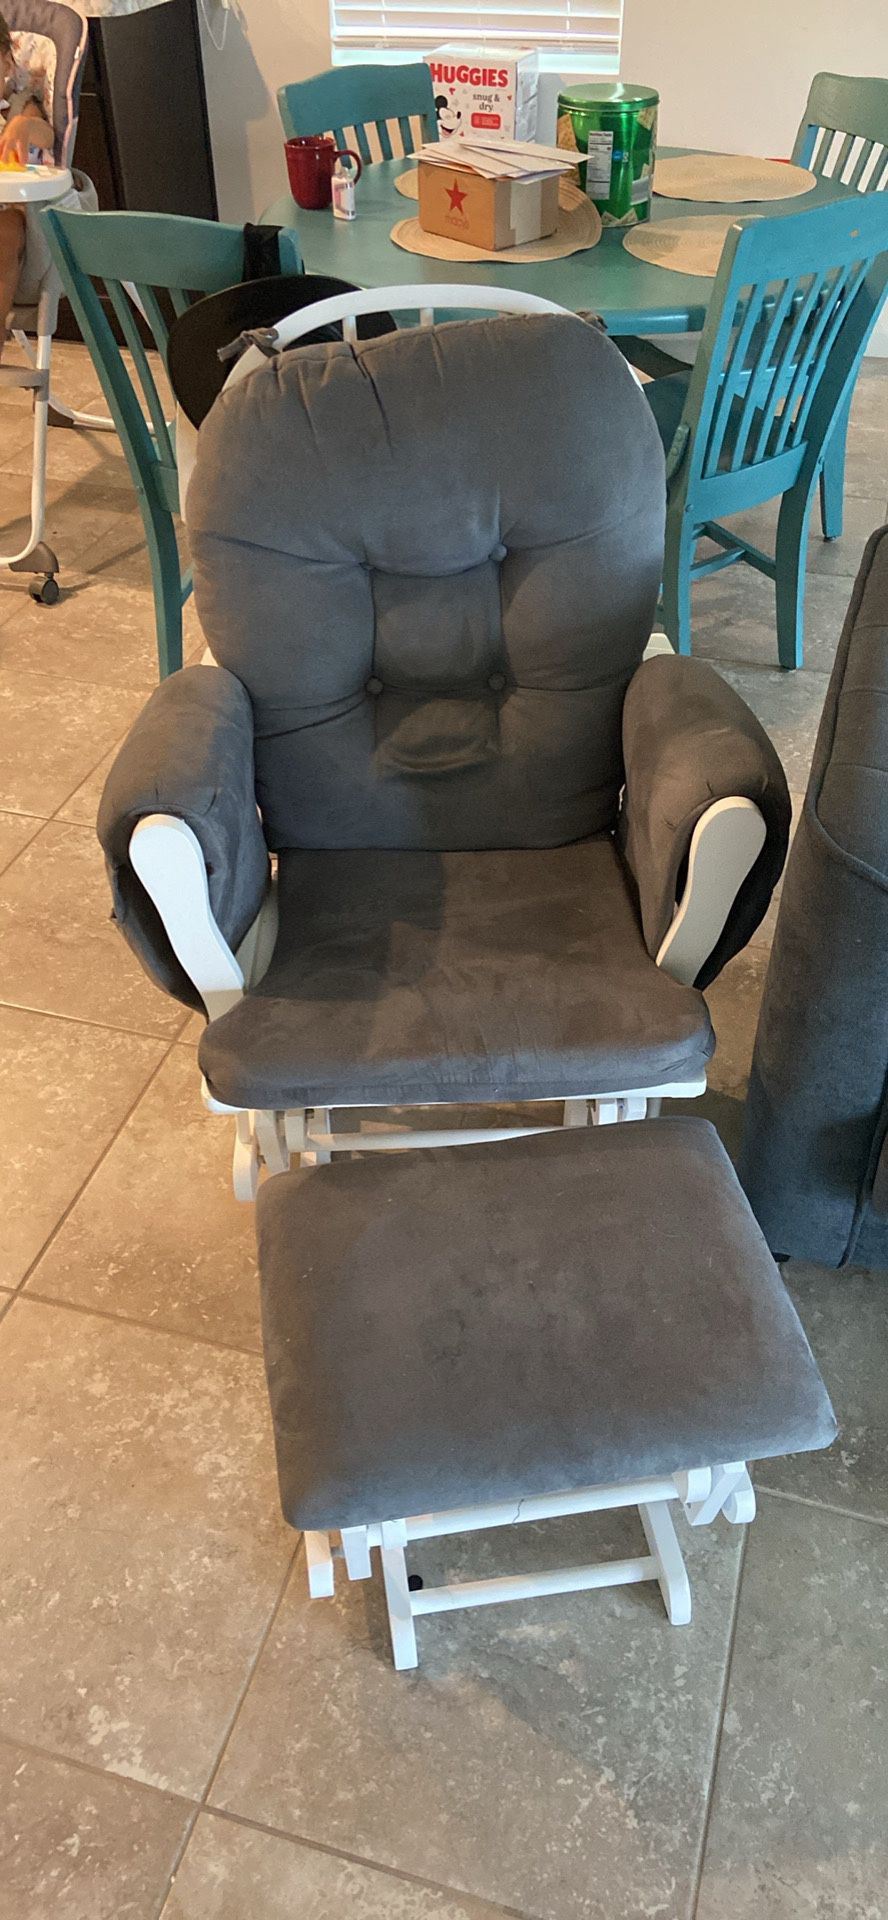 Gliding chair with gliding foot rest